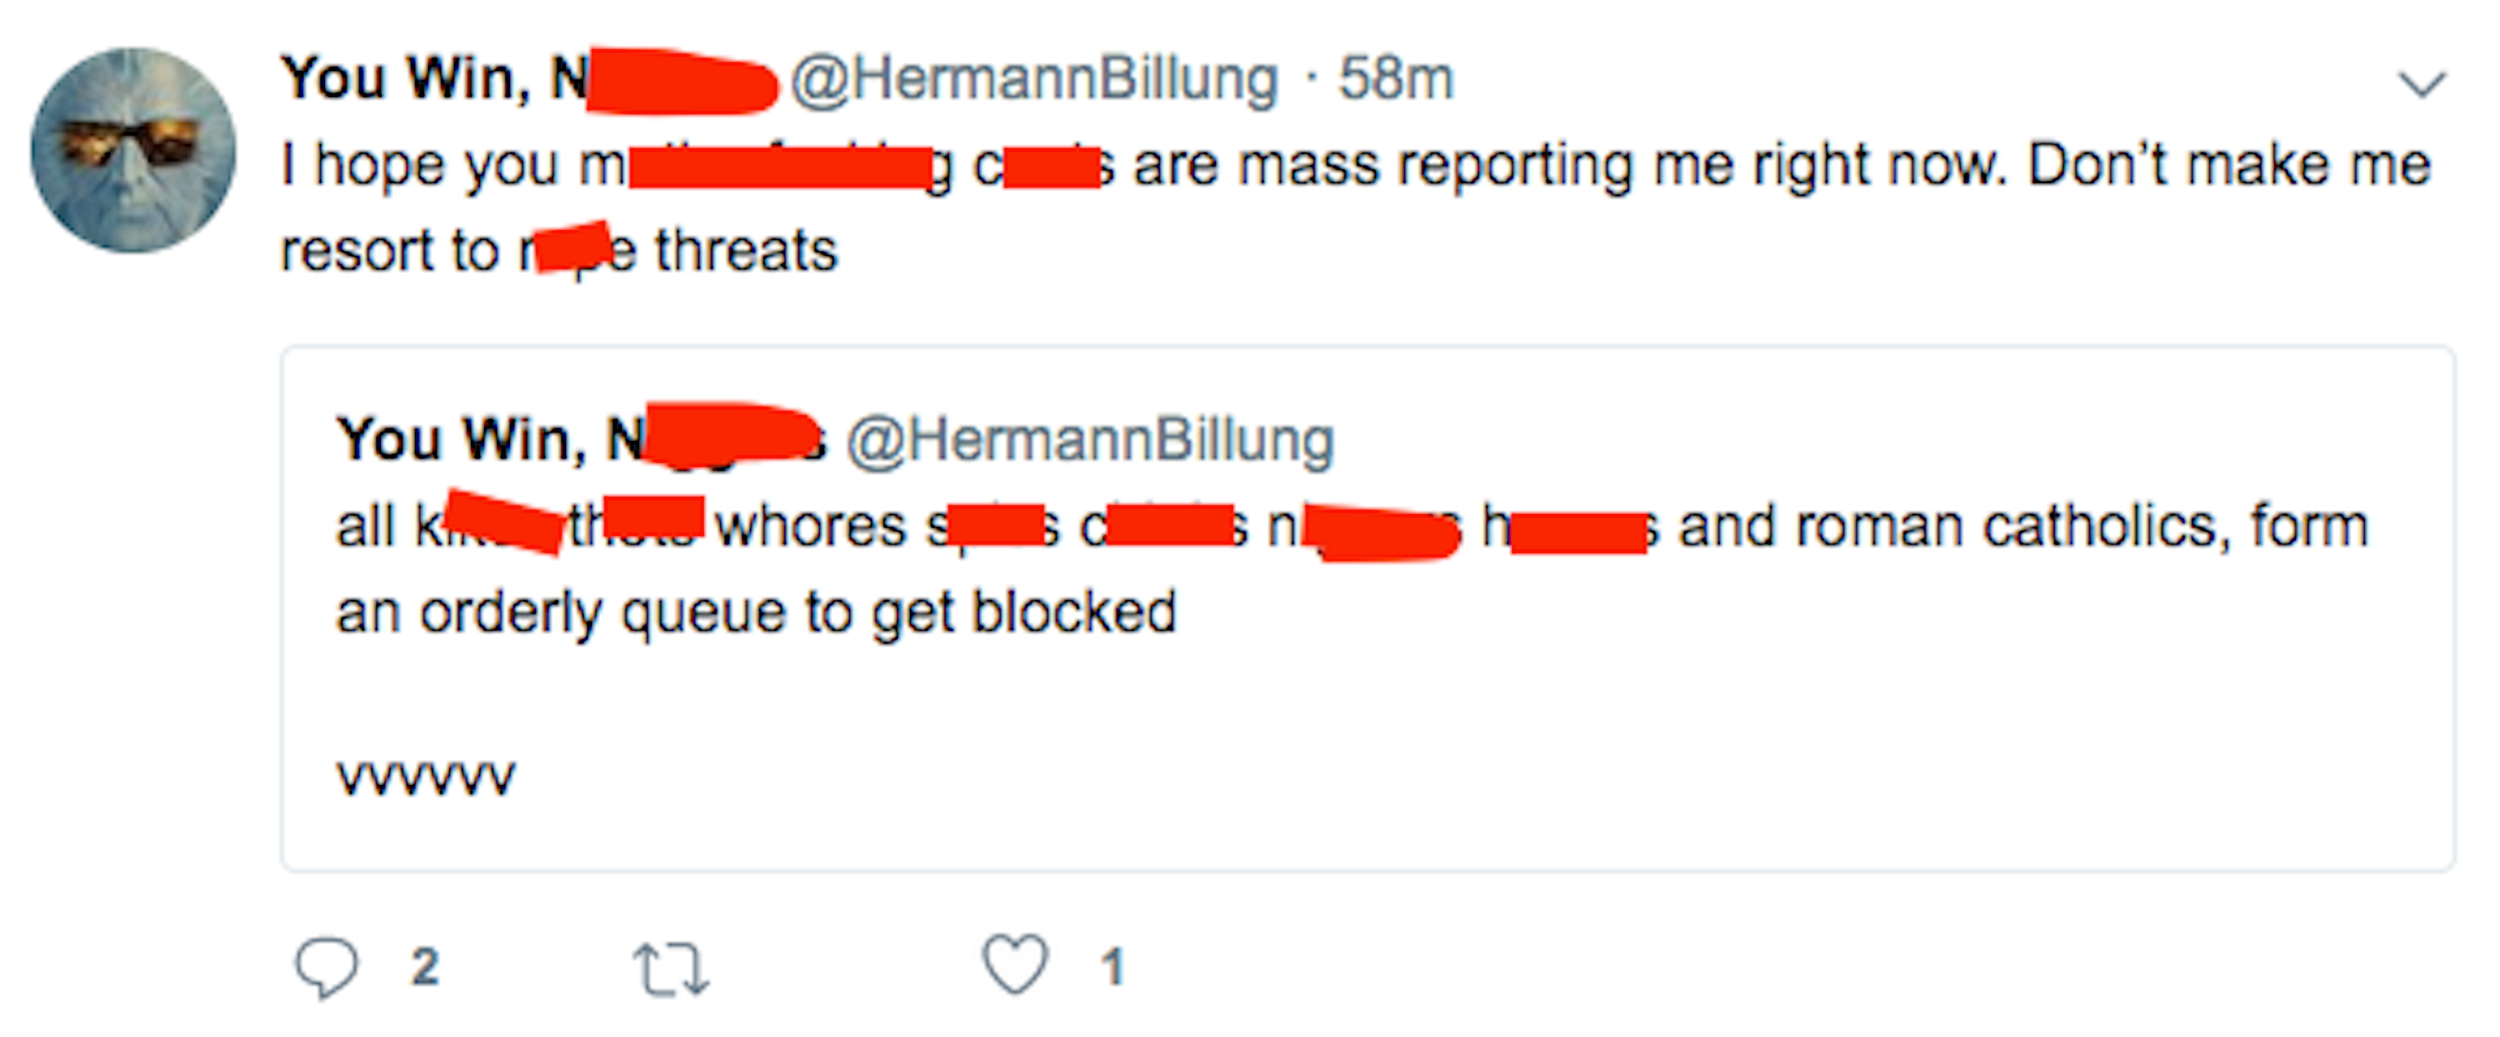 Woe as Hermann Billung letting loose a string of slurs against Black people, Asians, Jews, women, and gay people, saying, “Don’t make me resort to rape threats” and that he hopes people have blocked him. His Twitter handle reads "You Win, N----rs."